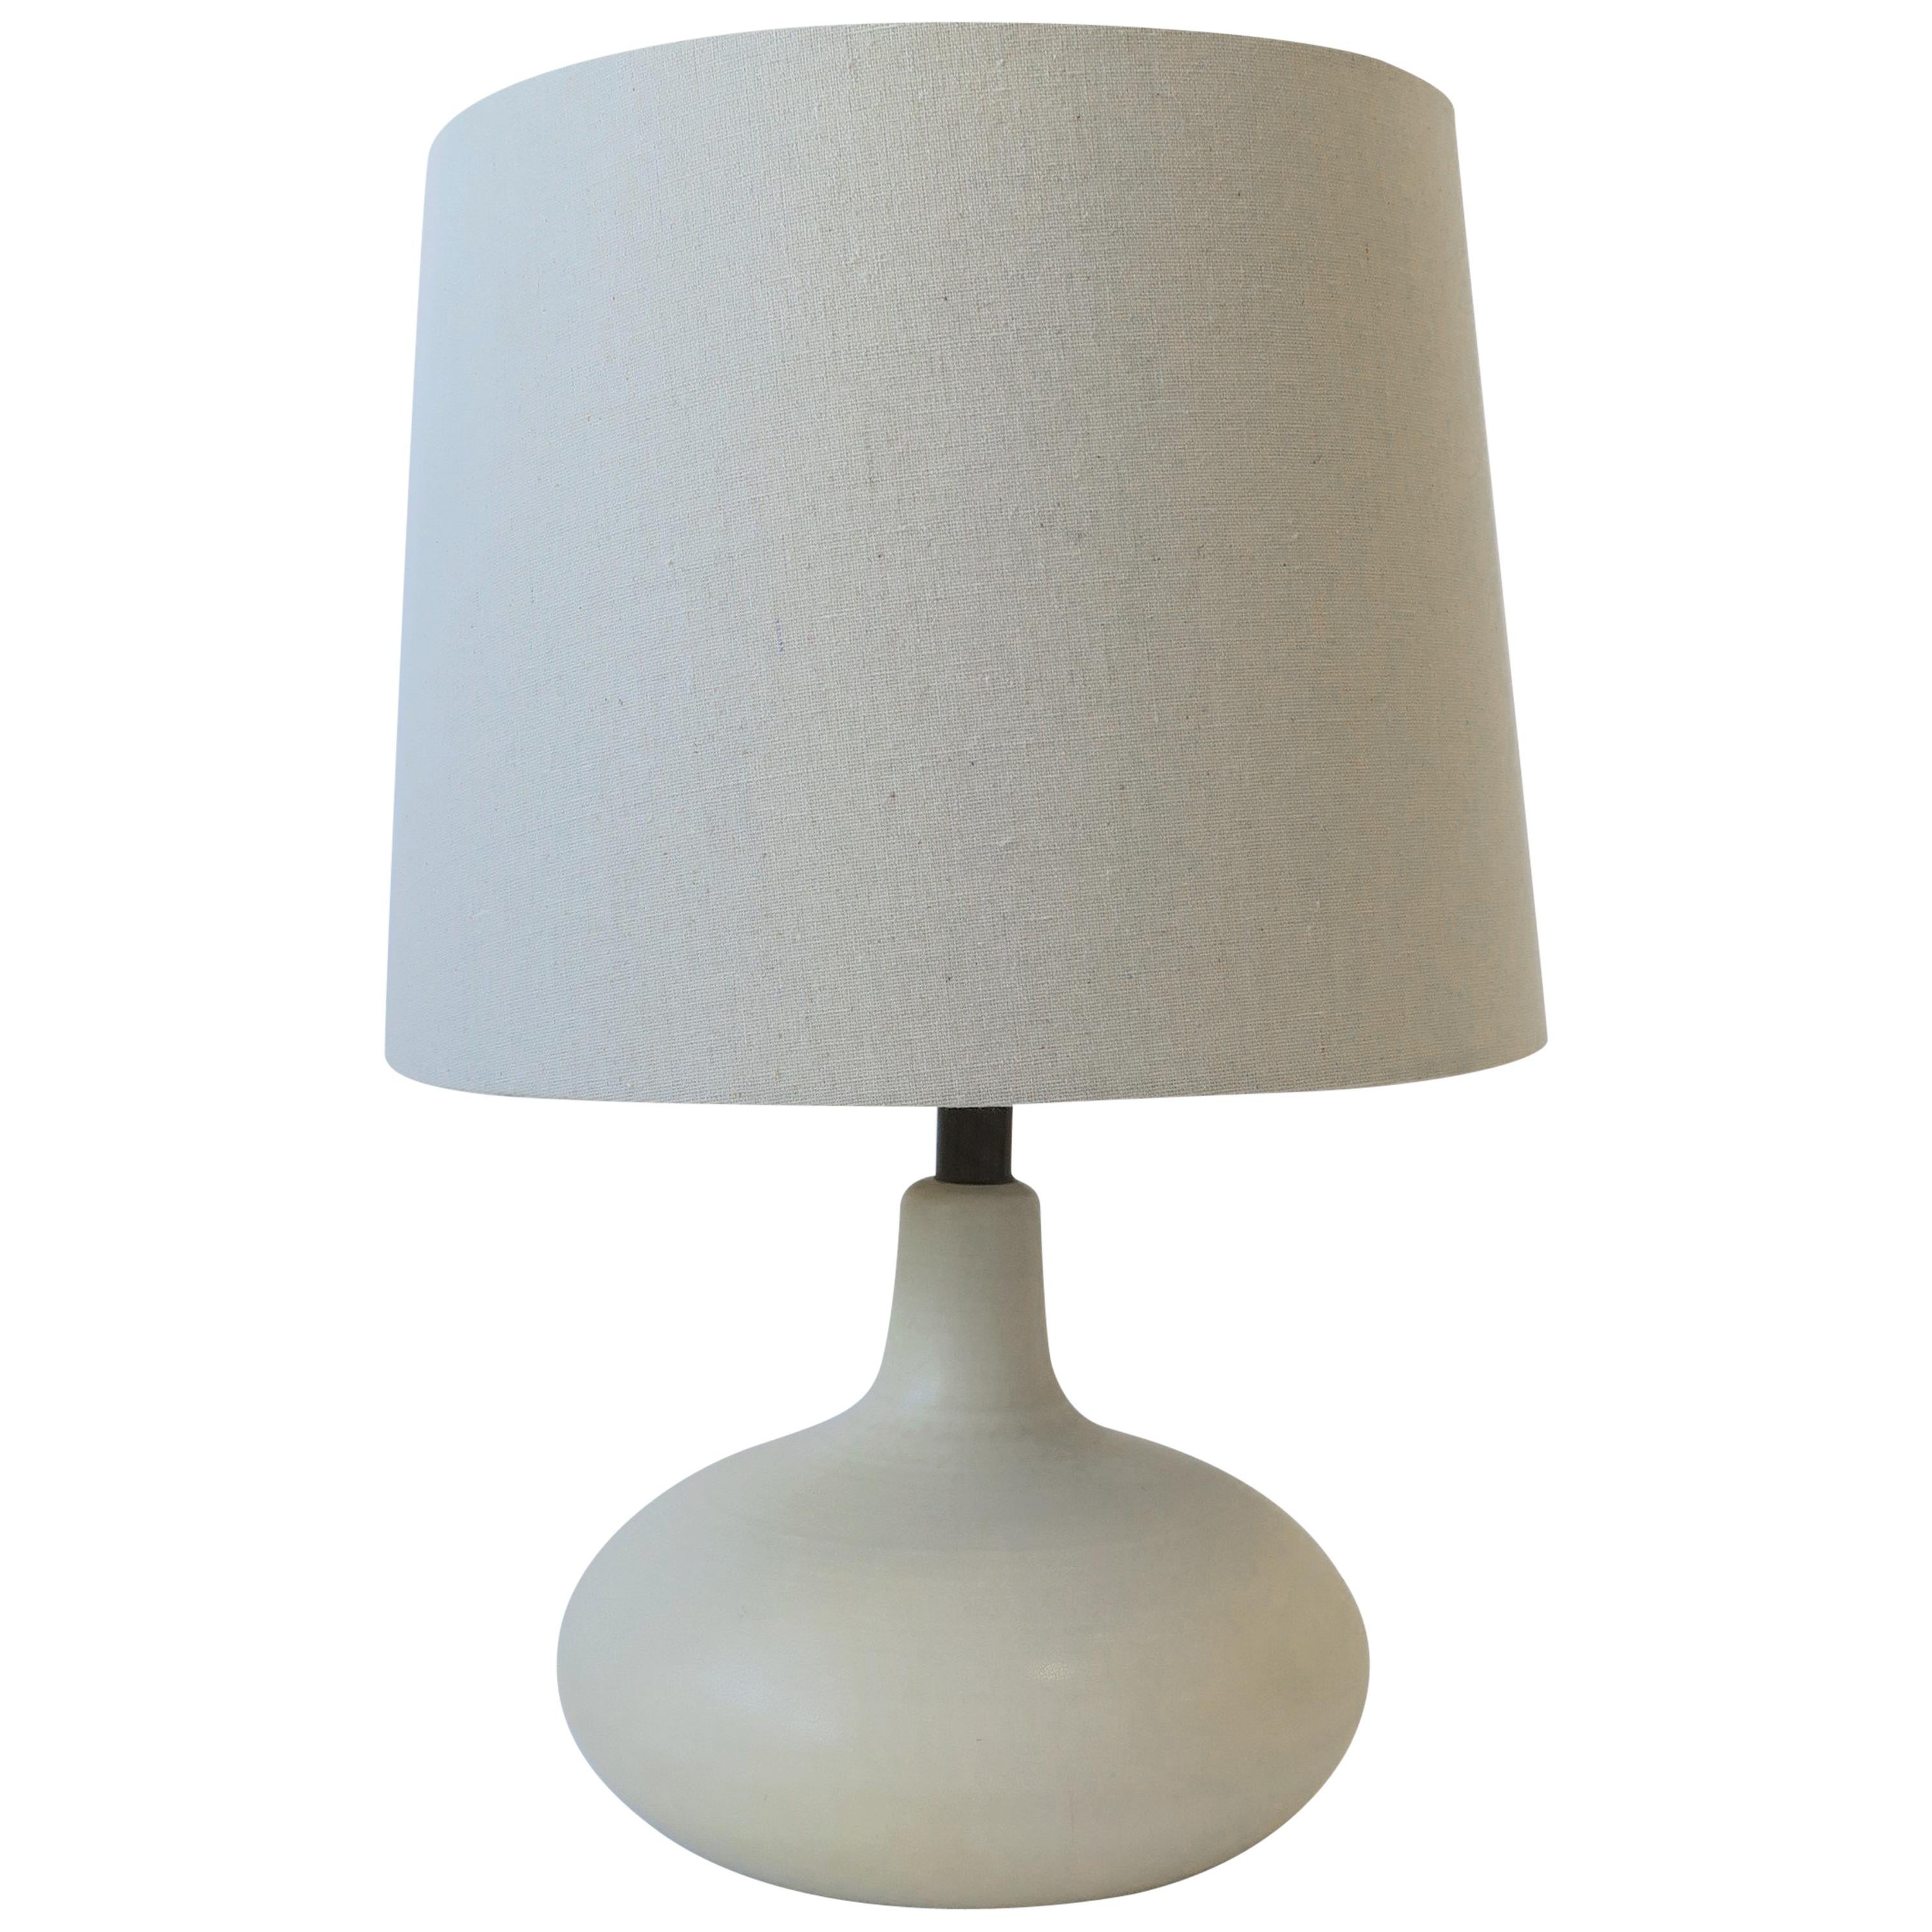 Midcentury Modern White Pottery Desk or Table Lamp, Small